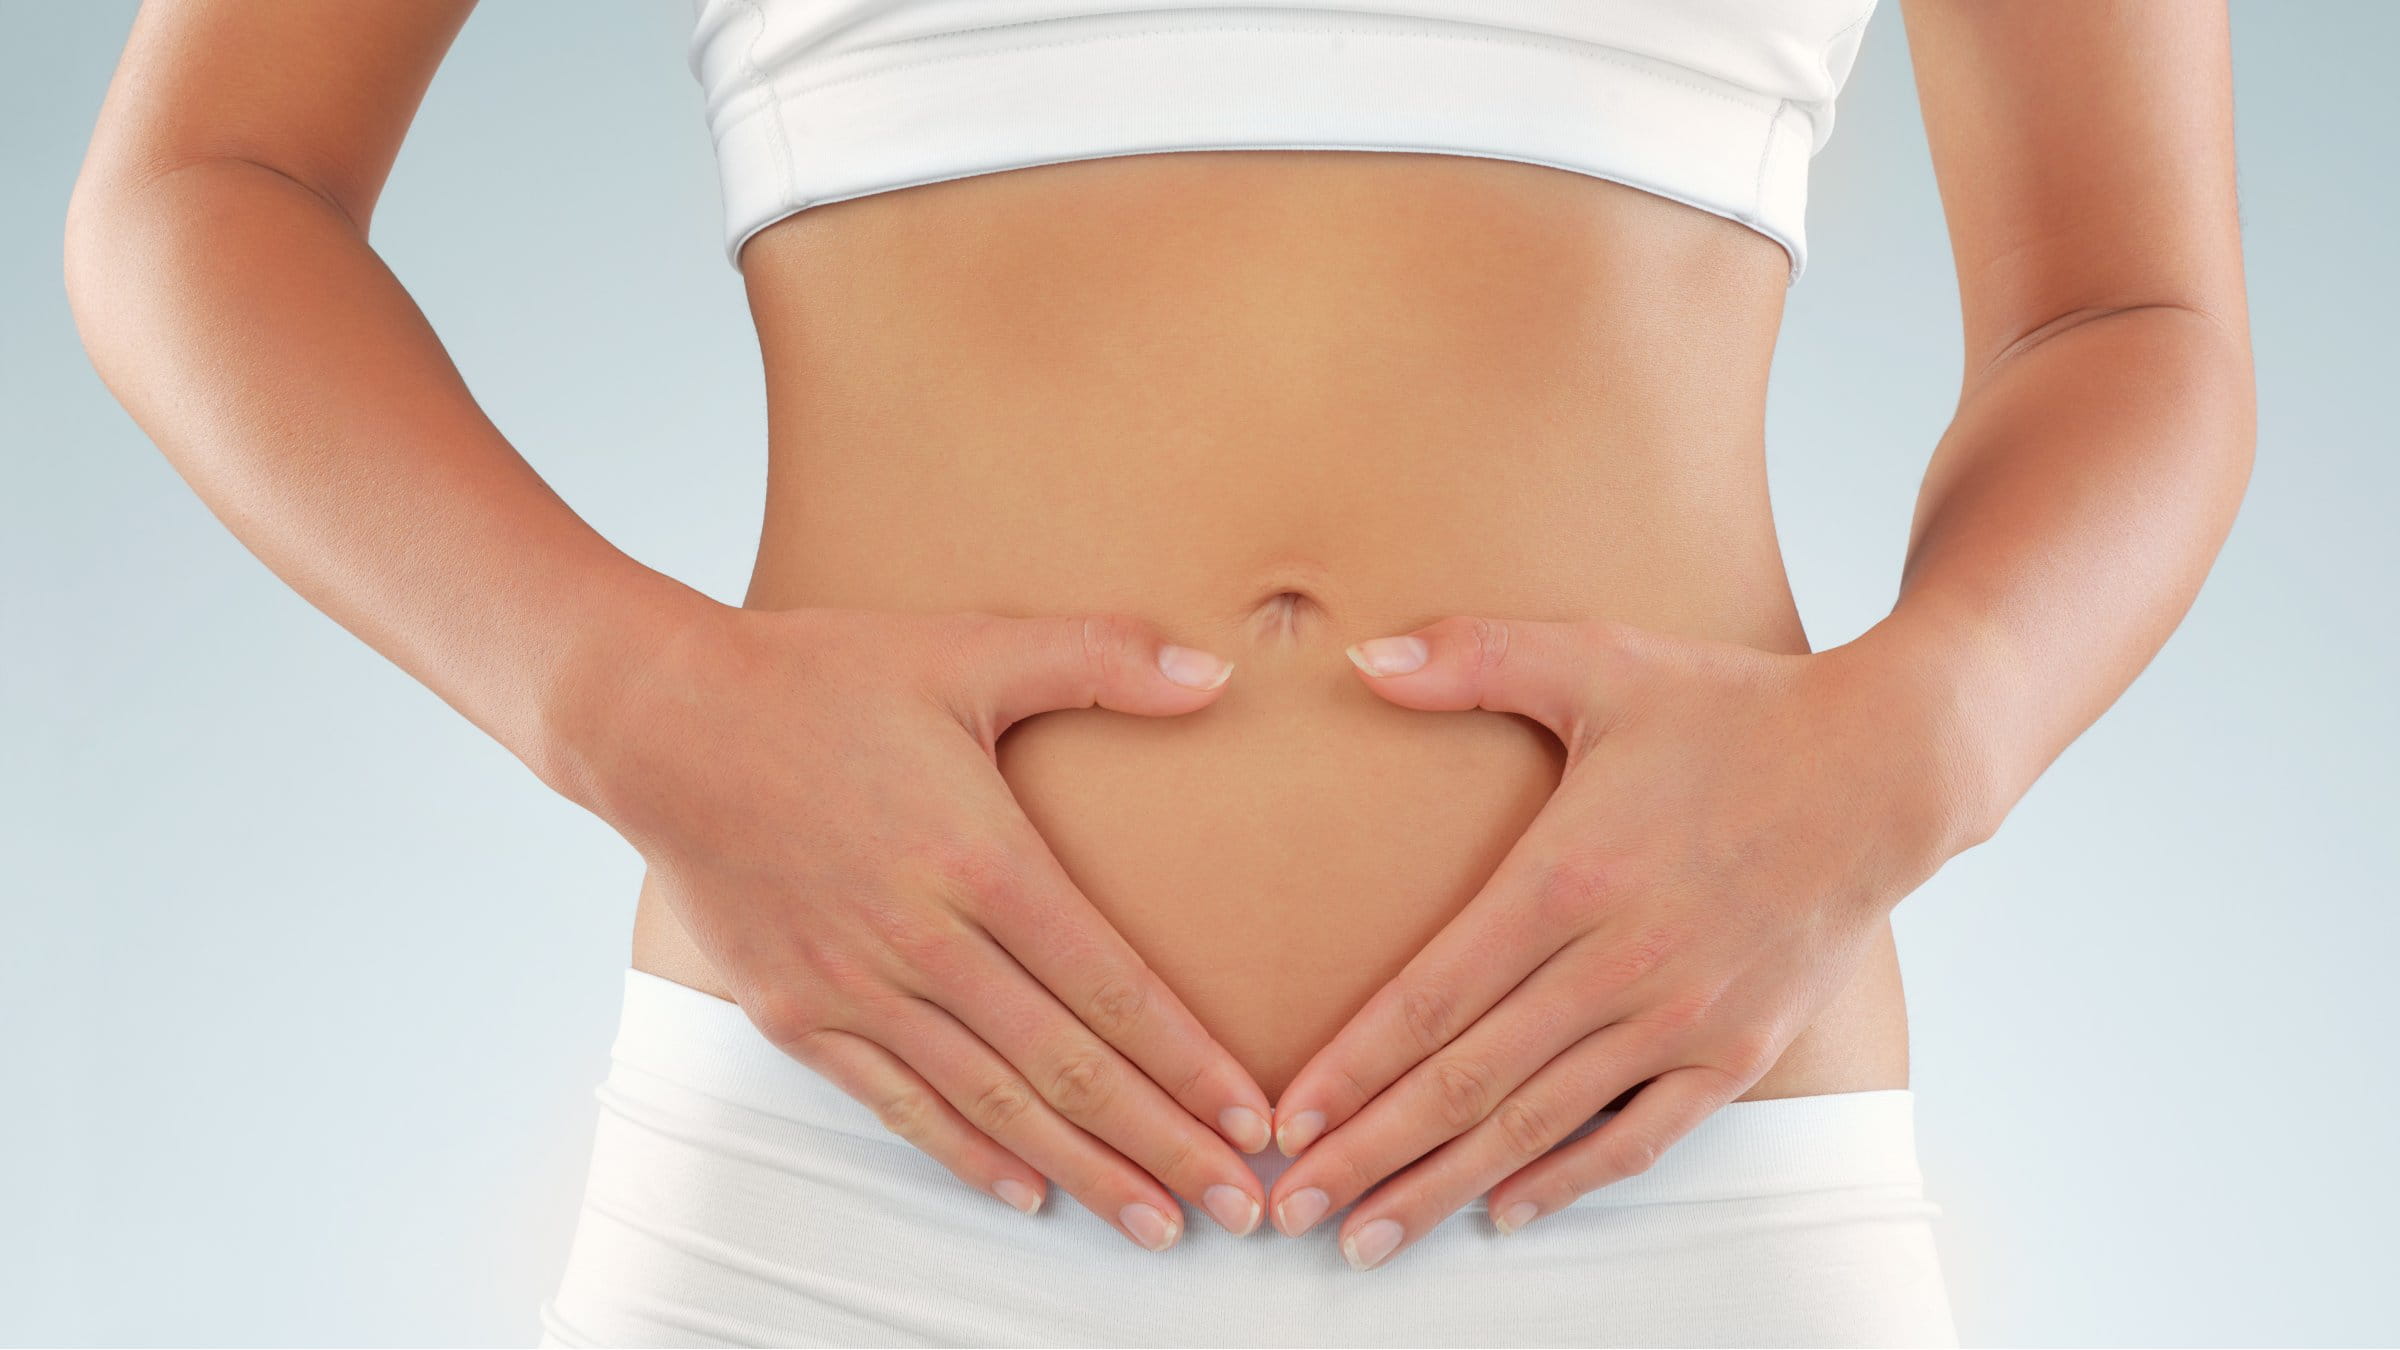 Can you really freeze away fat with CoolSculpting?